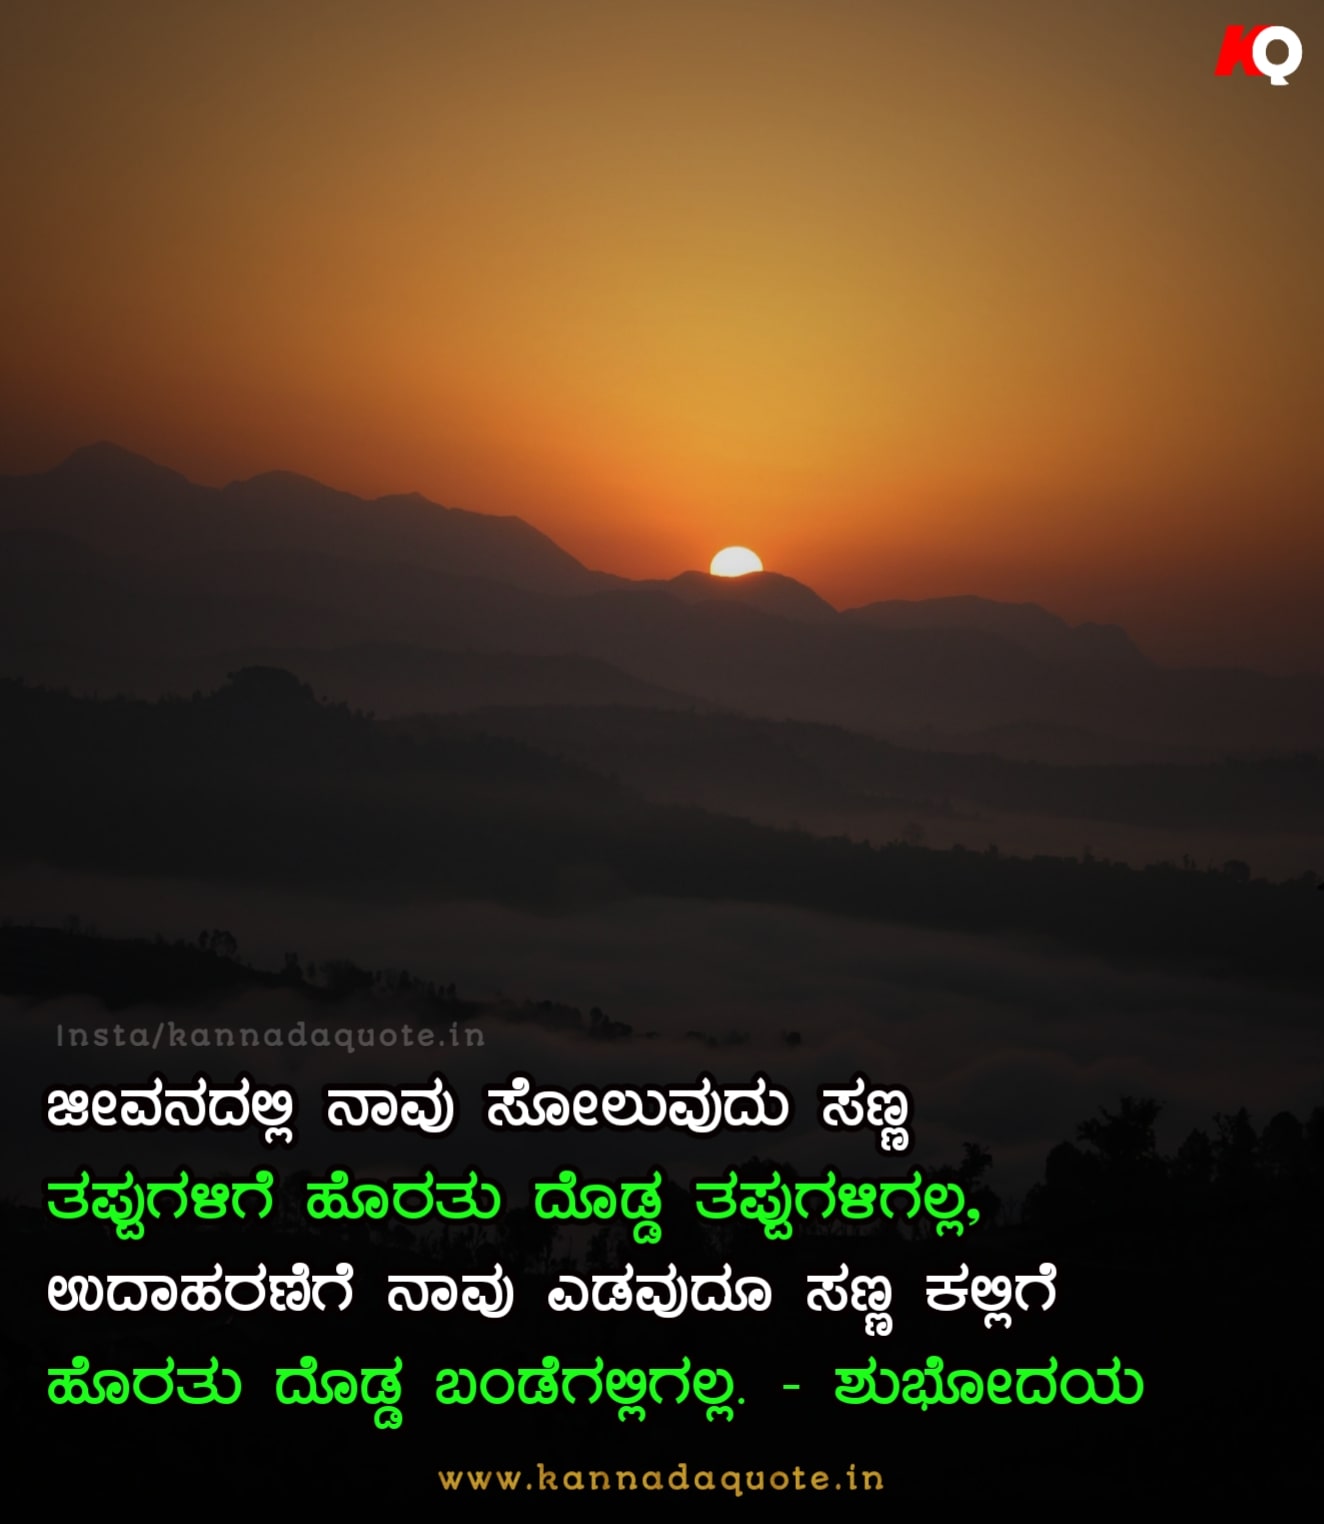 Good morning inspirational quotes images in Kannada